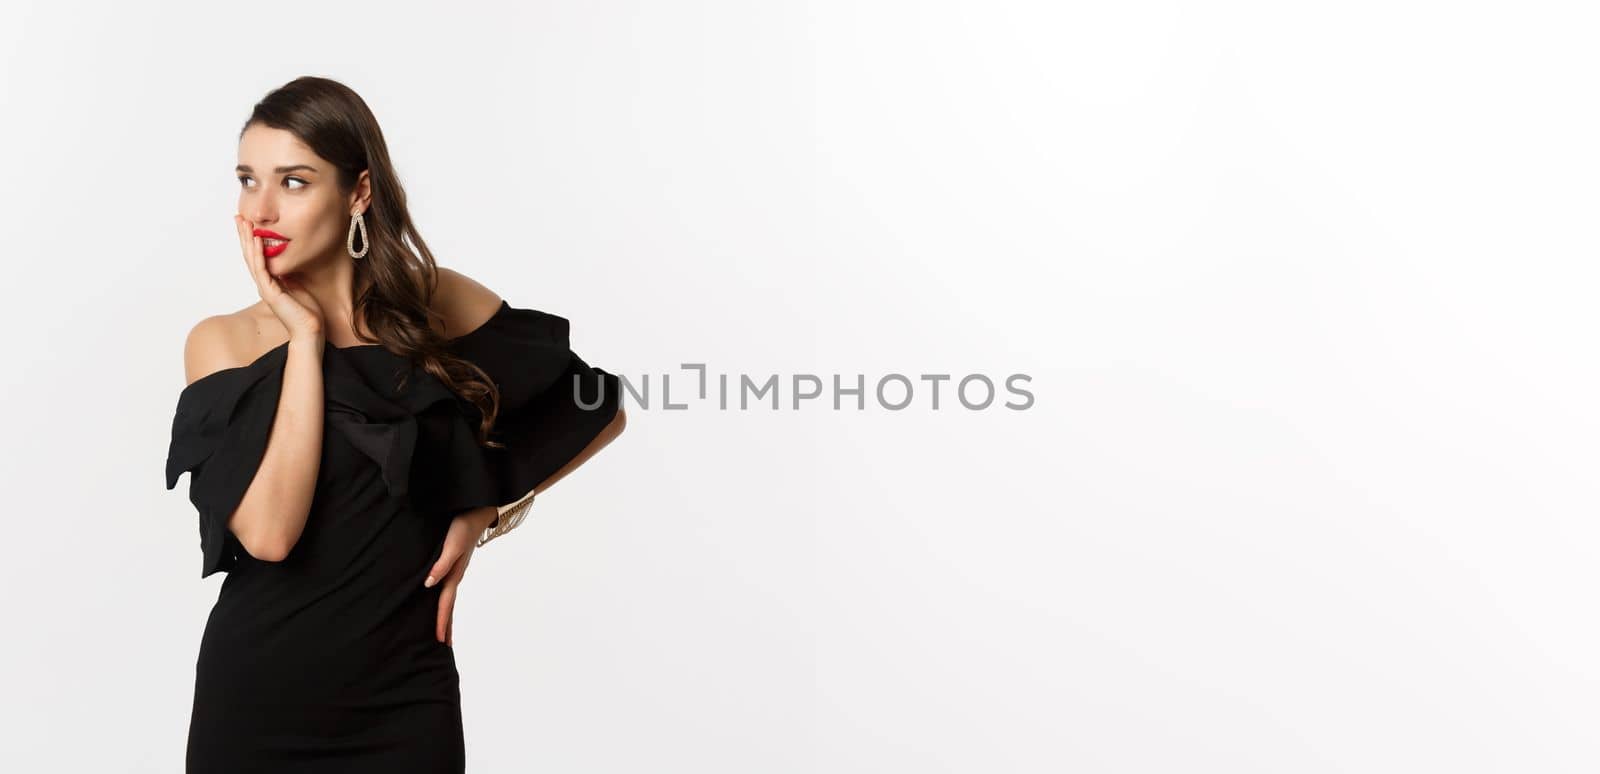 Fashion and beauty. Image of stylish beautiful woman in black dress and makeup, looking left with temptation, touching red lips, standing over white background.